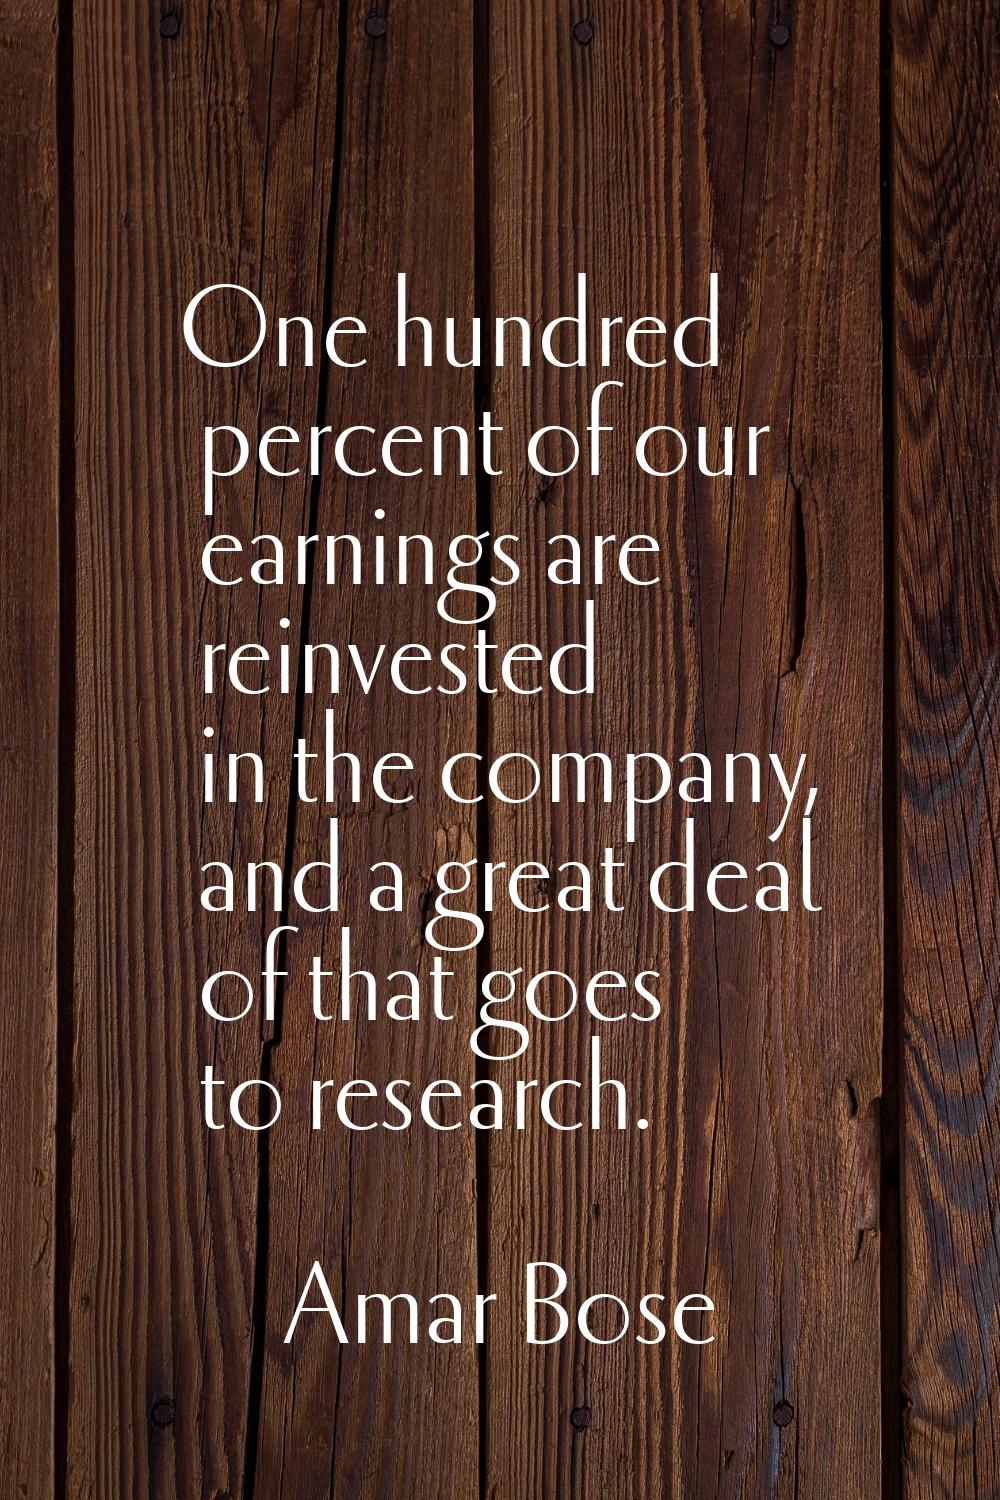 One hundred percent of our earnings are reinvested in the company, and a great deal of that goes to